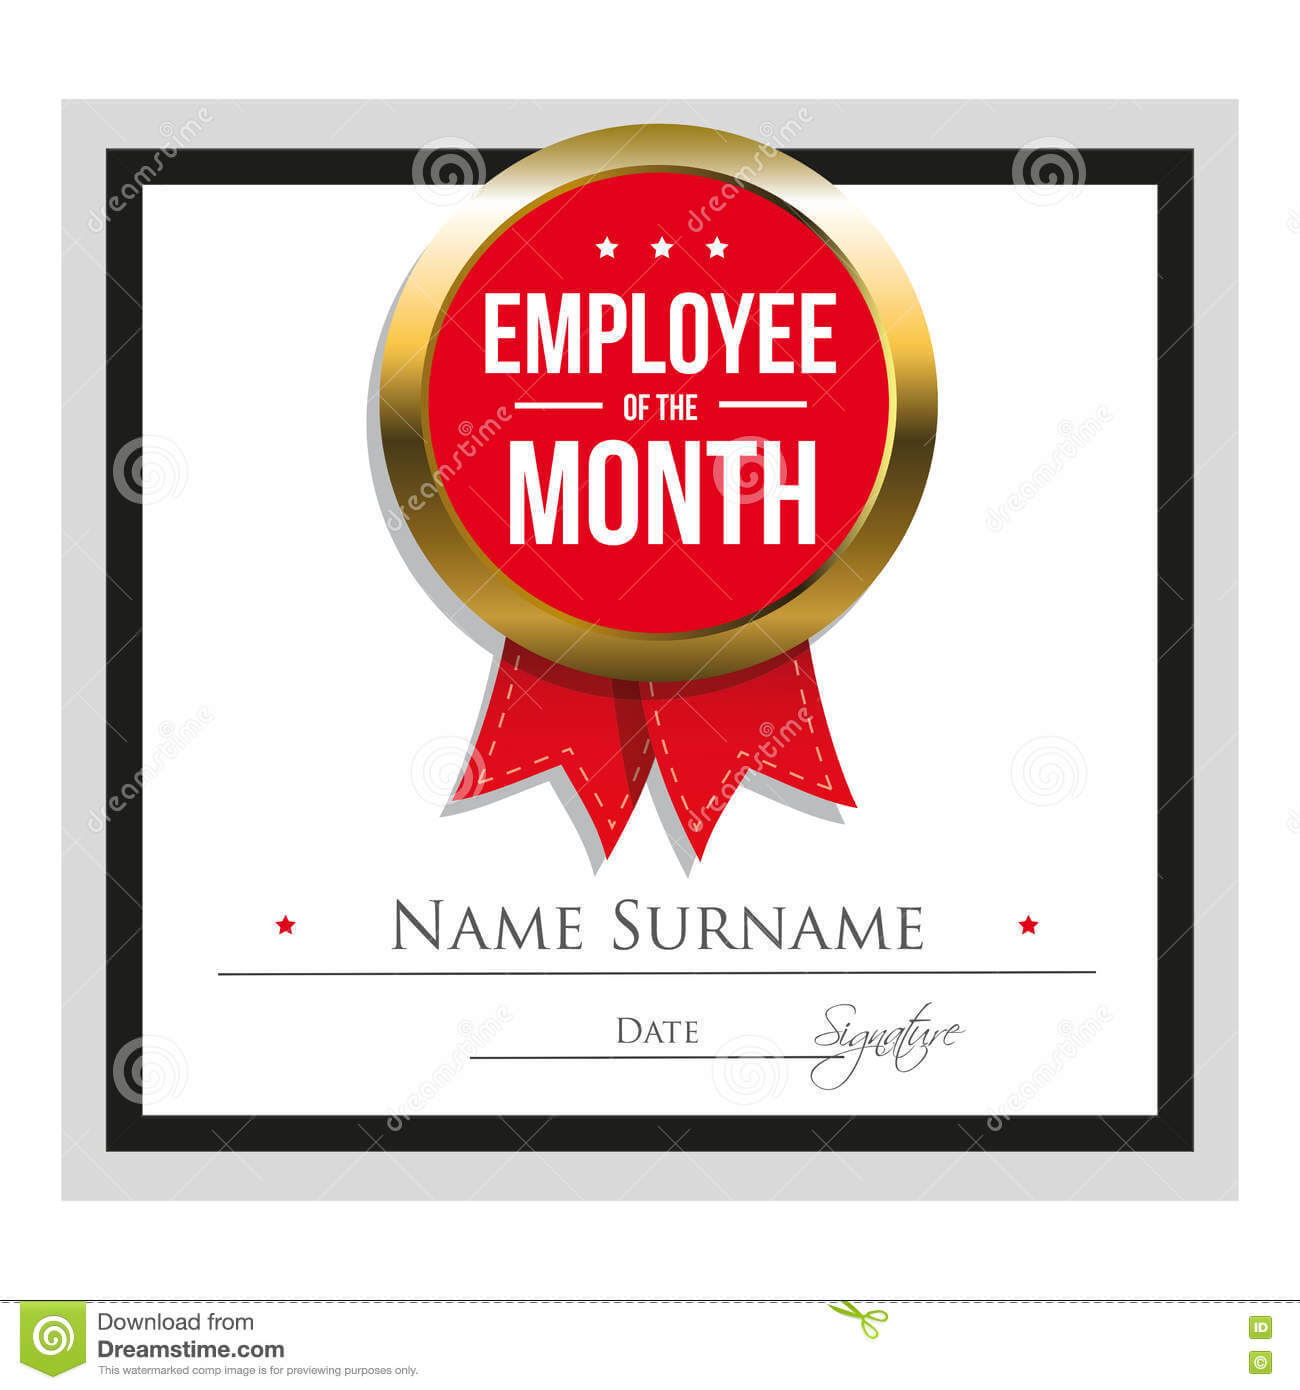 Employee Of The Month Certificate Template Stock Vector With Regard To Employee Of The Year Certificate Template Free